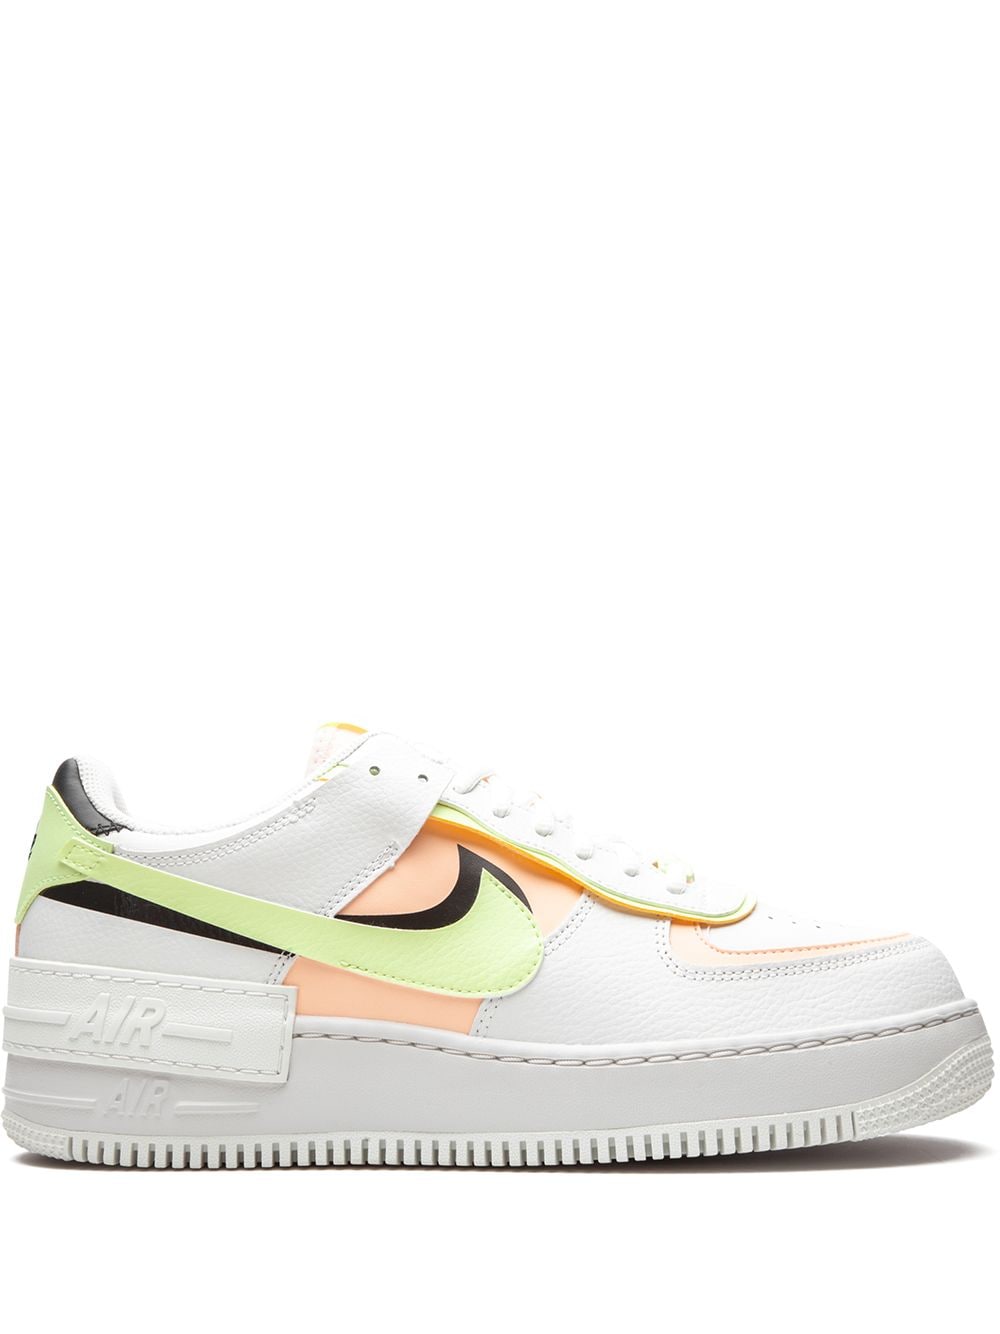 Nike Air Force 1 Shadow "White/Barely Volt/Crimson Tint" sneakers von Nike